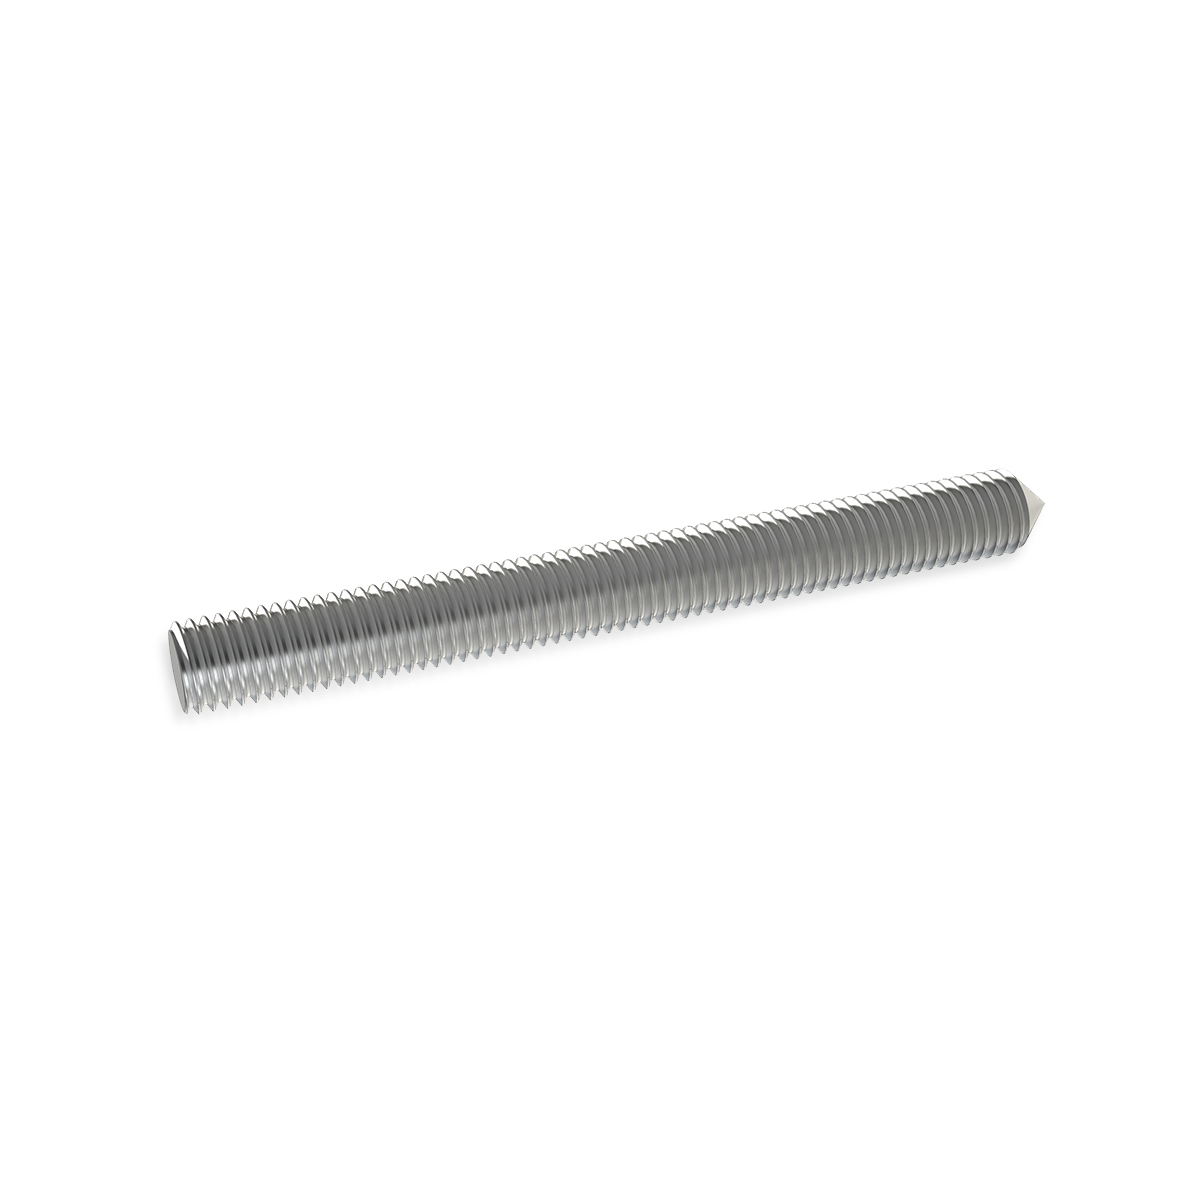 1/4'' Diameter X 5'' Long, Stainless Steel 1/4-20 Threaded Stud (1 End Flat - 1 End Conical)